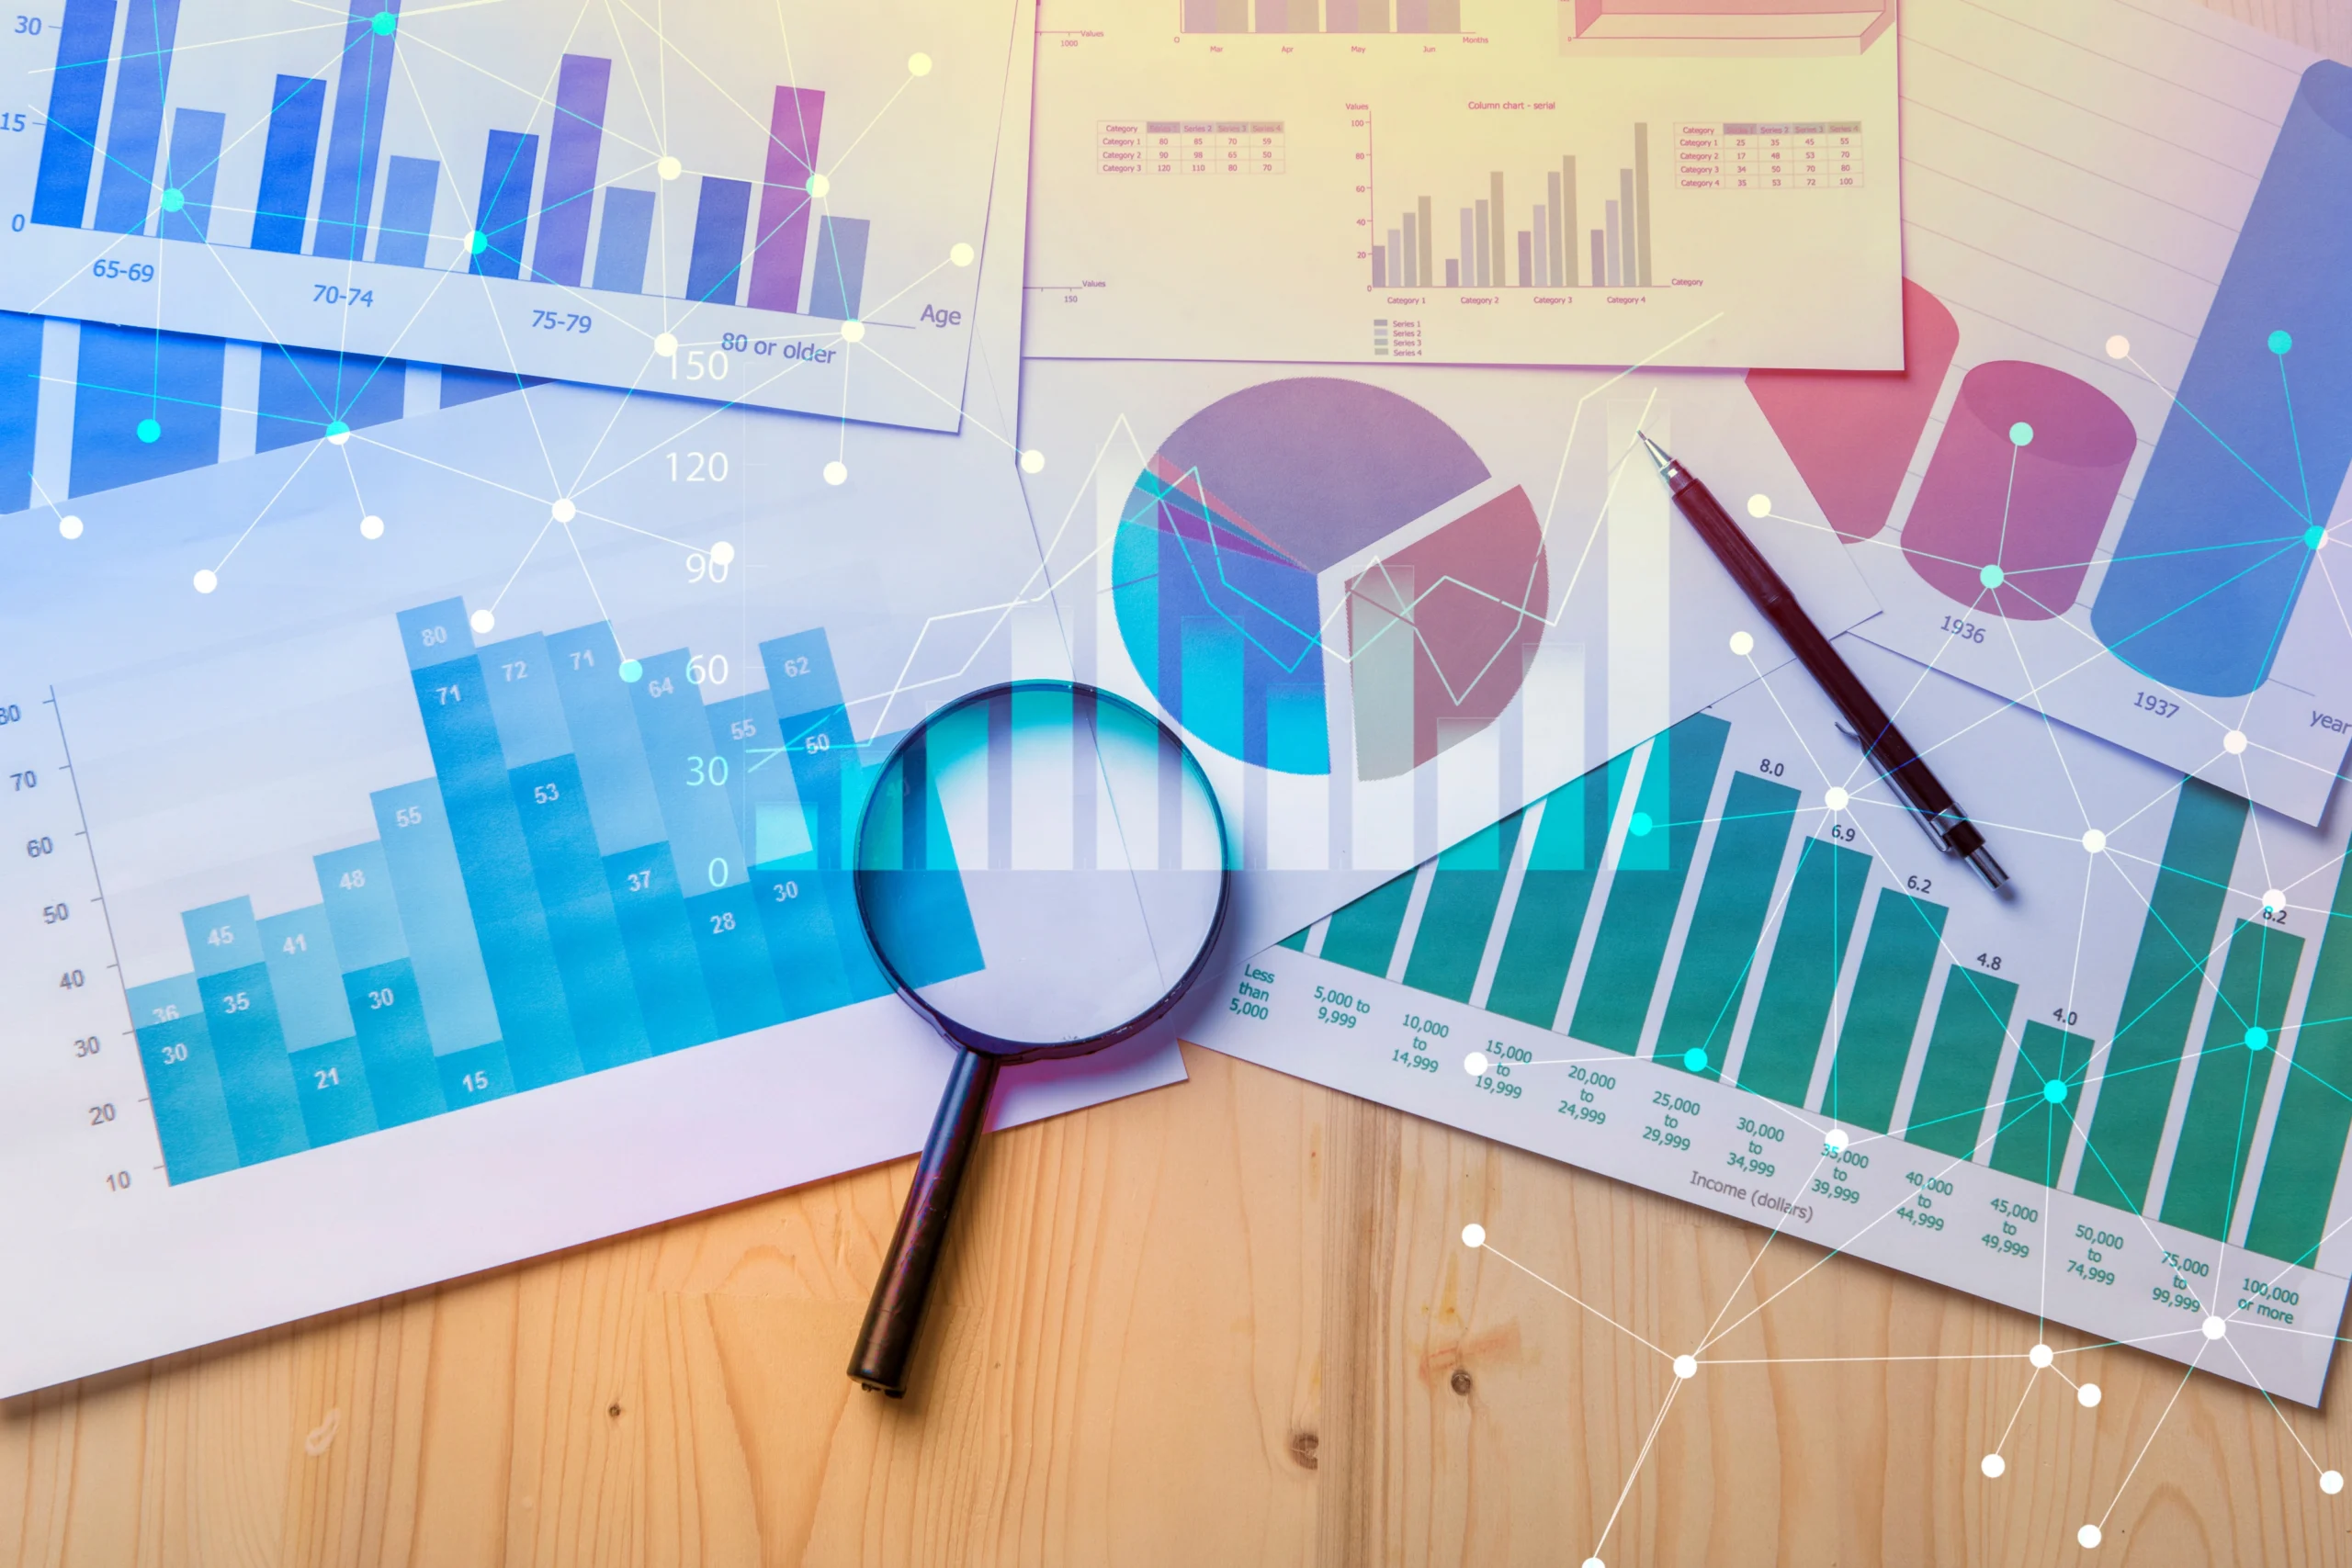 A stock image of a magnifying glass on top of printed charts and graphs